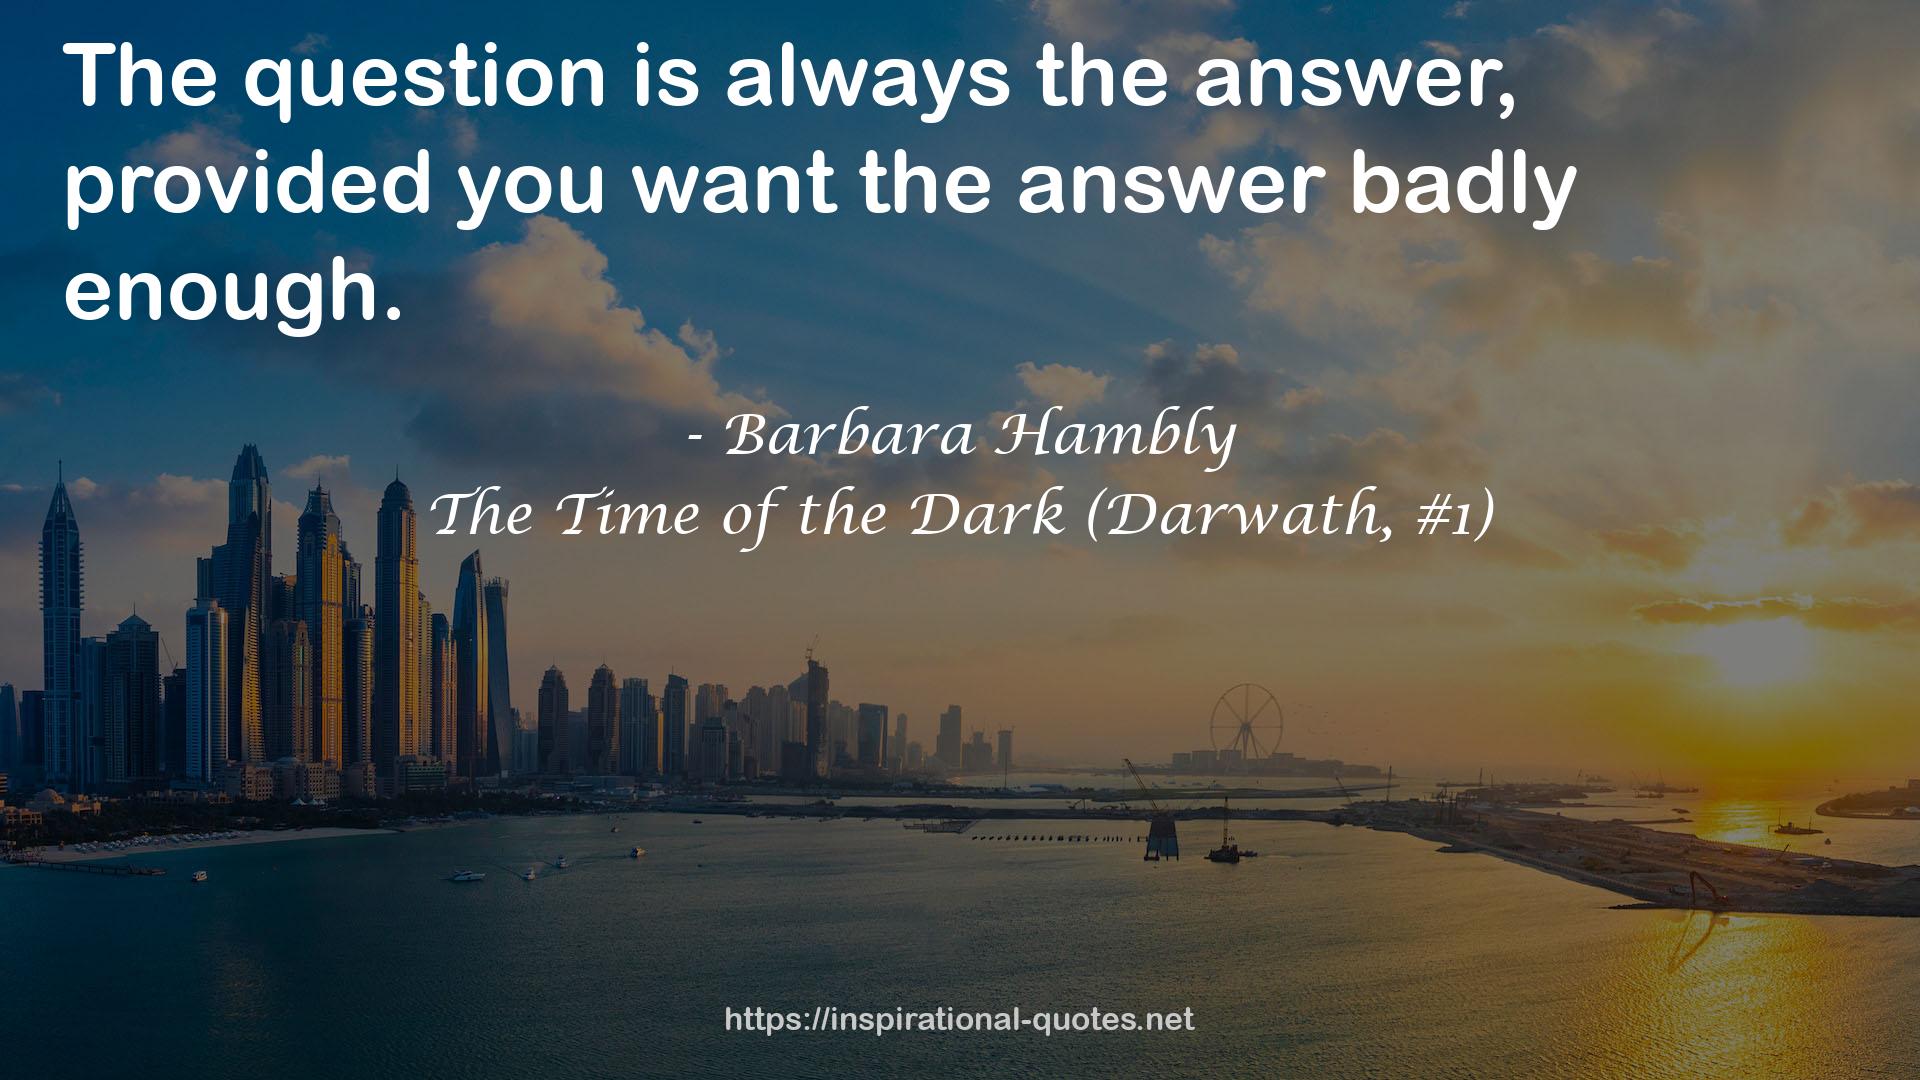 The Time of the Dark (Darwath, #1) QUOTES